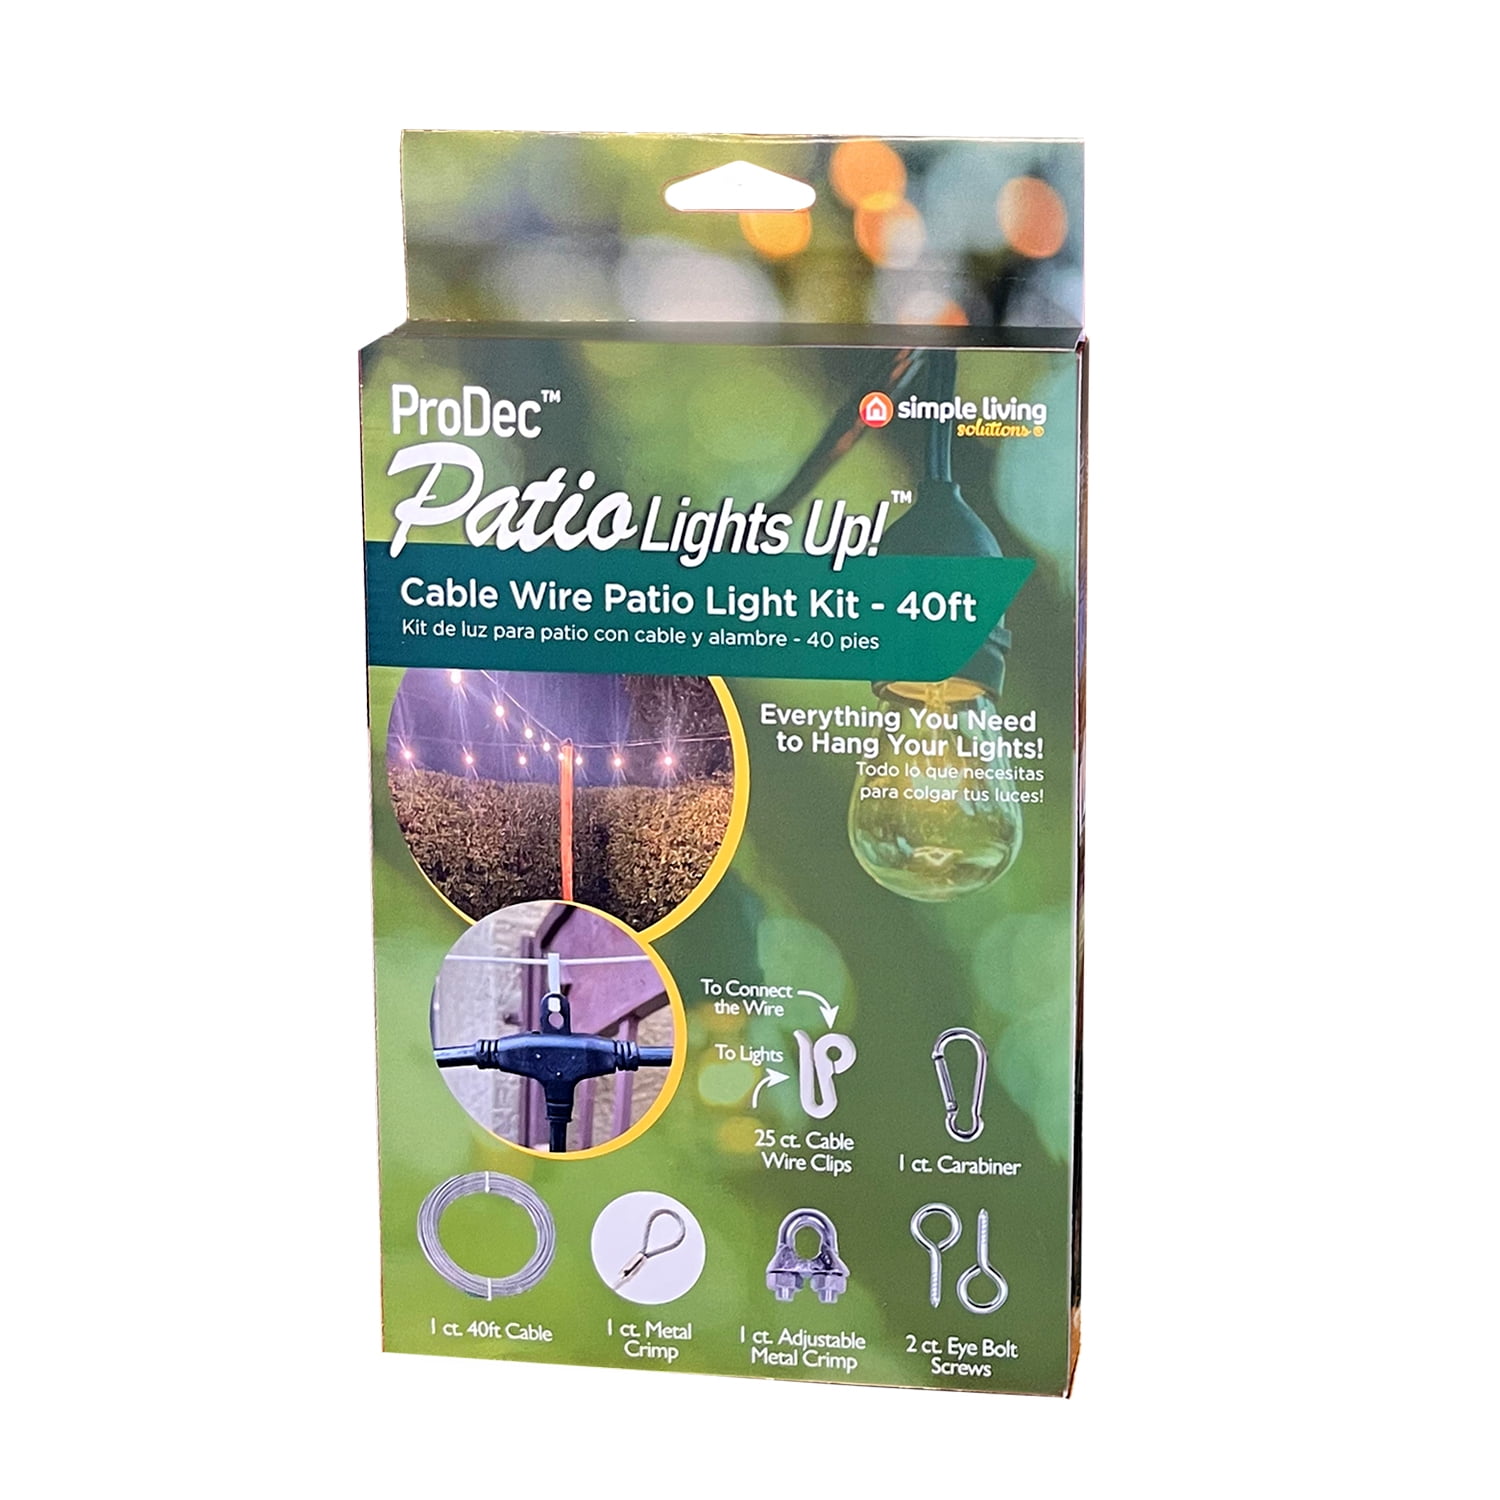 Pro Dec Silver 40' Cable Wire Patio Light Hanging Kit for Outdoor Use by: Simple Living Solutions